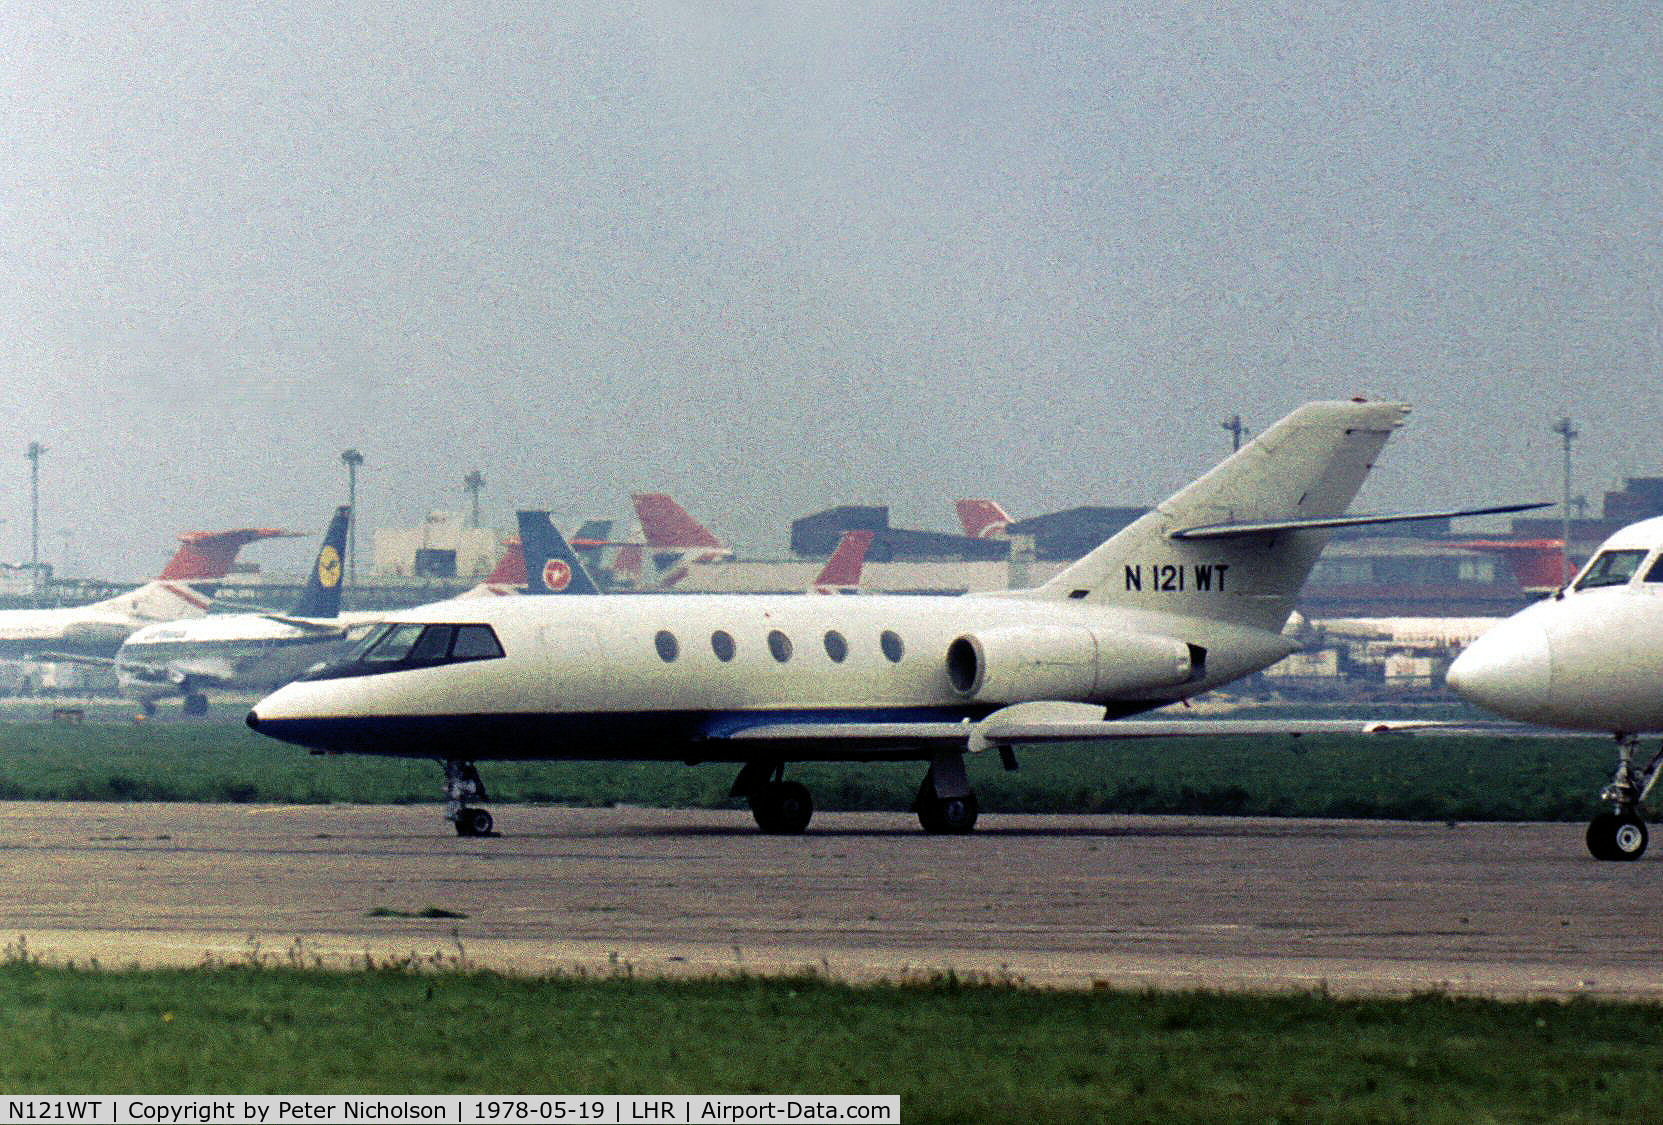 N121WT, 1972 Dassault Falcon (Mystere) 20F C/N 274, Falcon 20F of International Business Machines seen parked at Heathrow in May 1978.